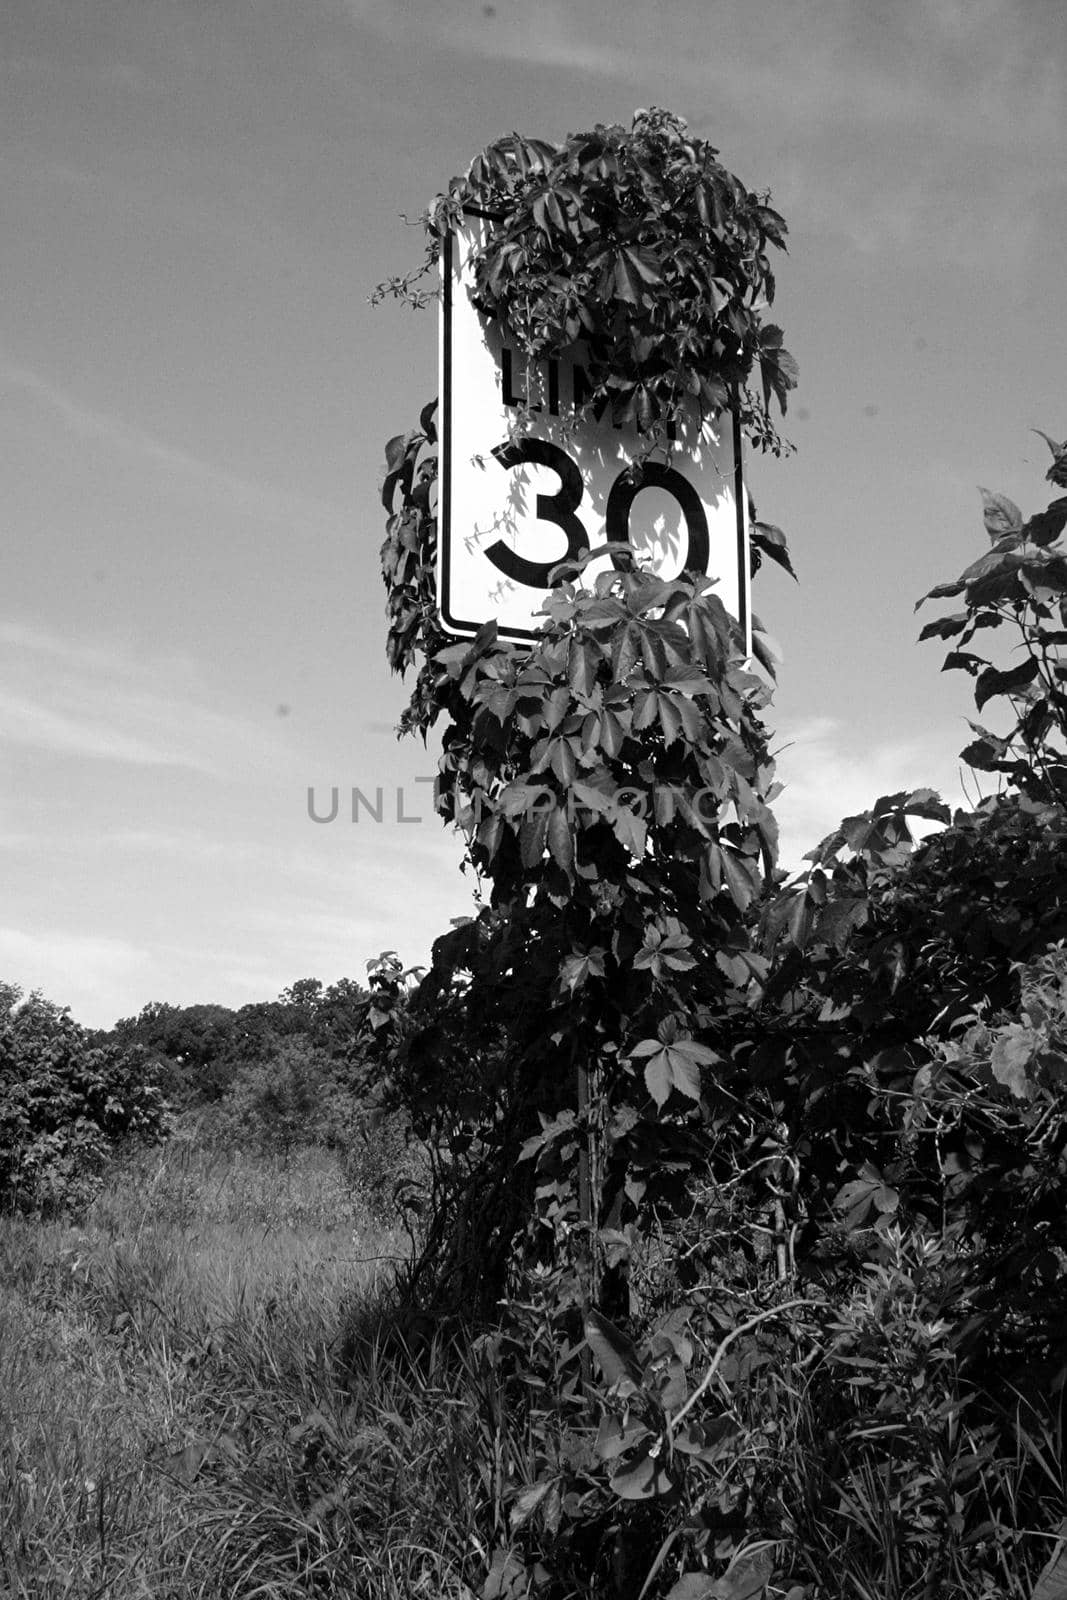 Vines and bushes grow and cover a 30 mile per hour sign on an abandoned road by njproductions